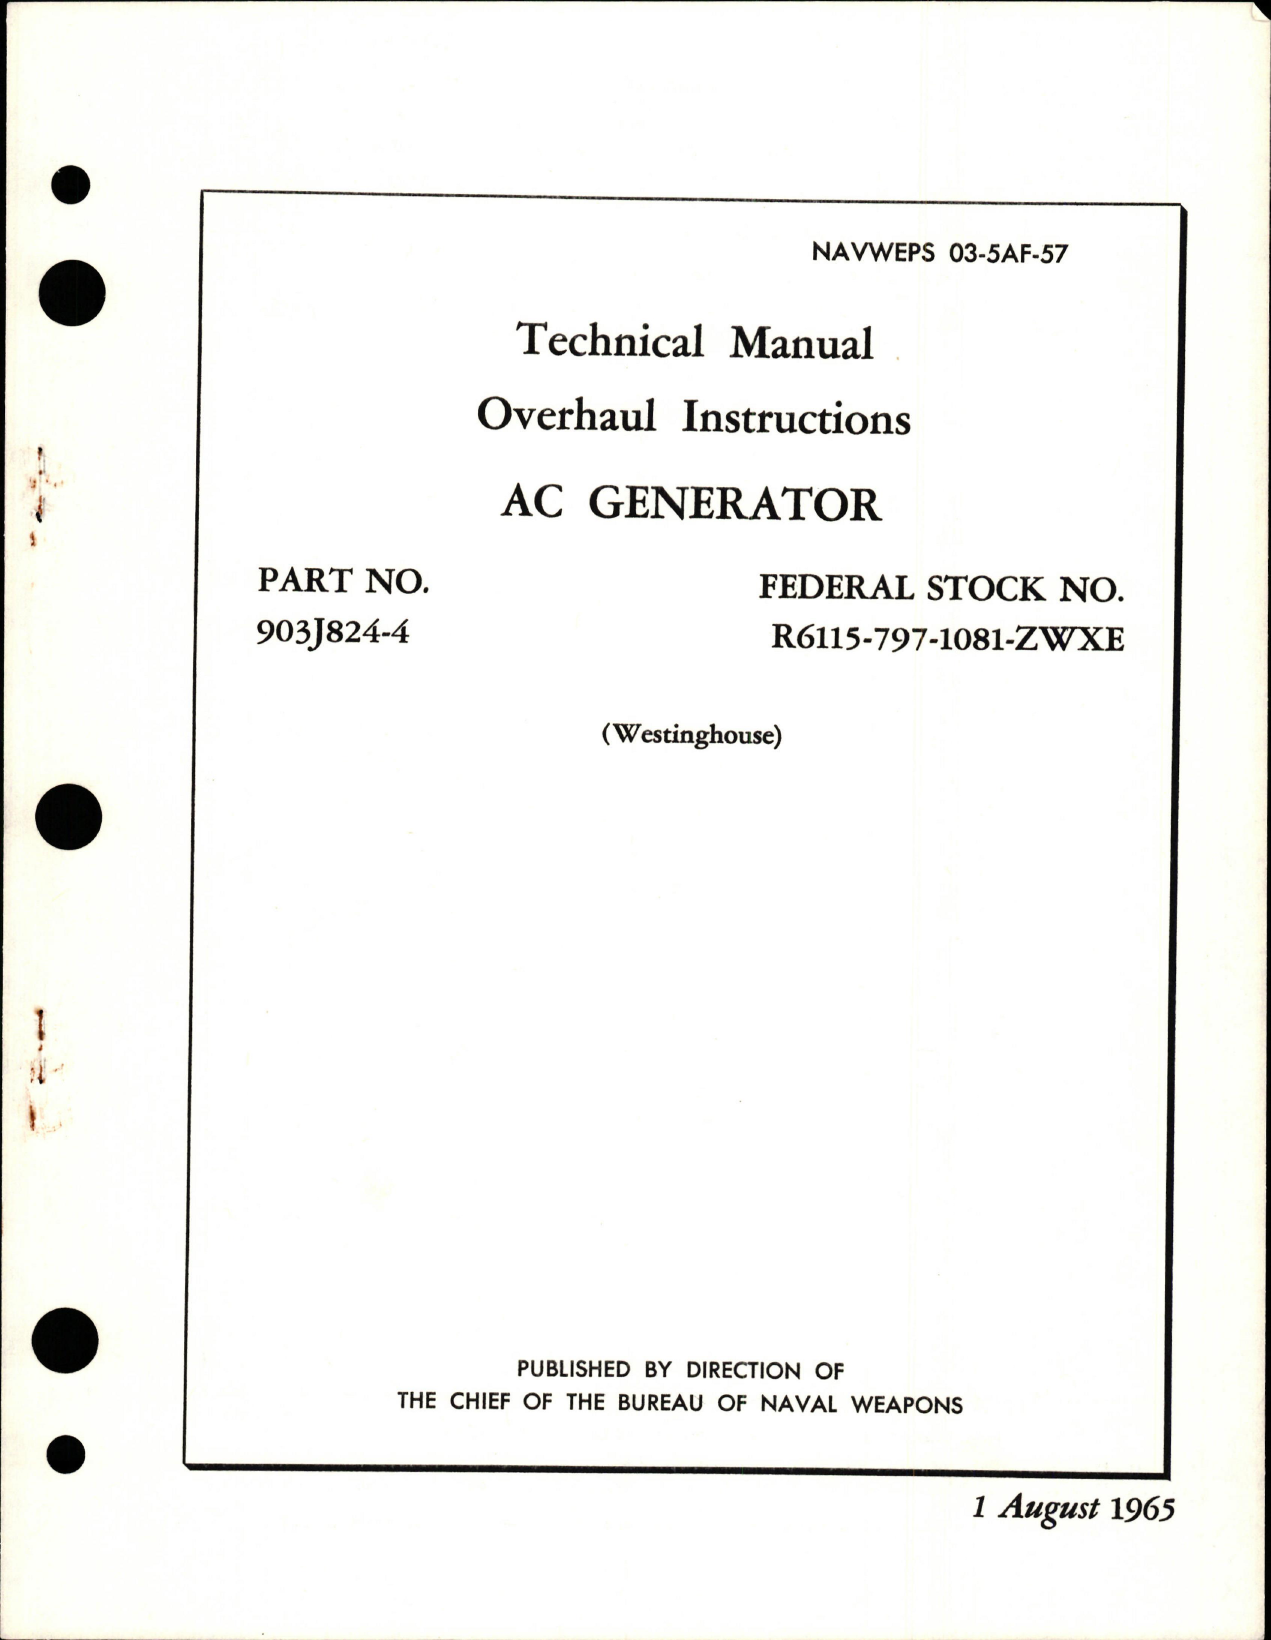 Sample page 1 from AirCorps Library document: Overhaul Instructions for AC Generator - Part 903J824-4 